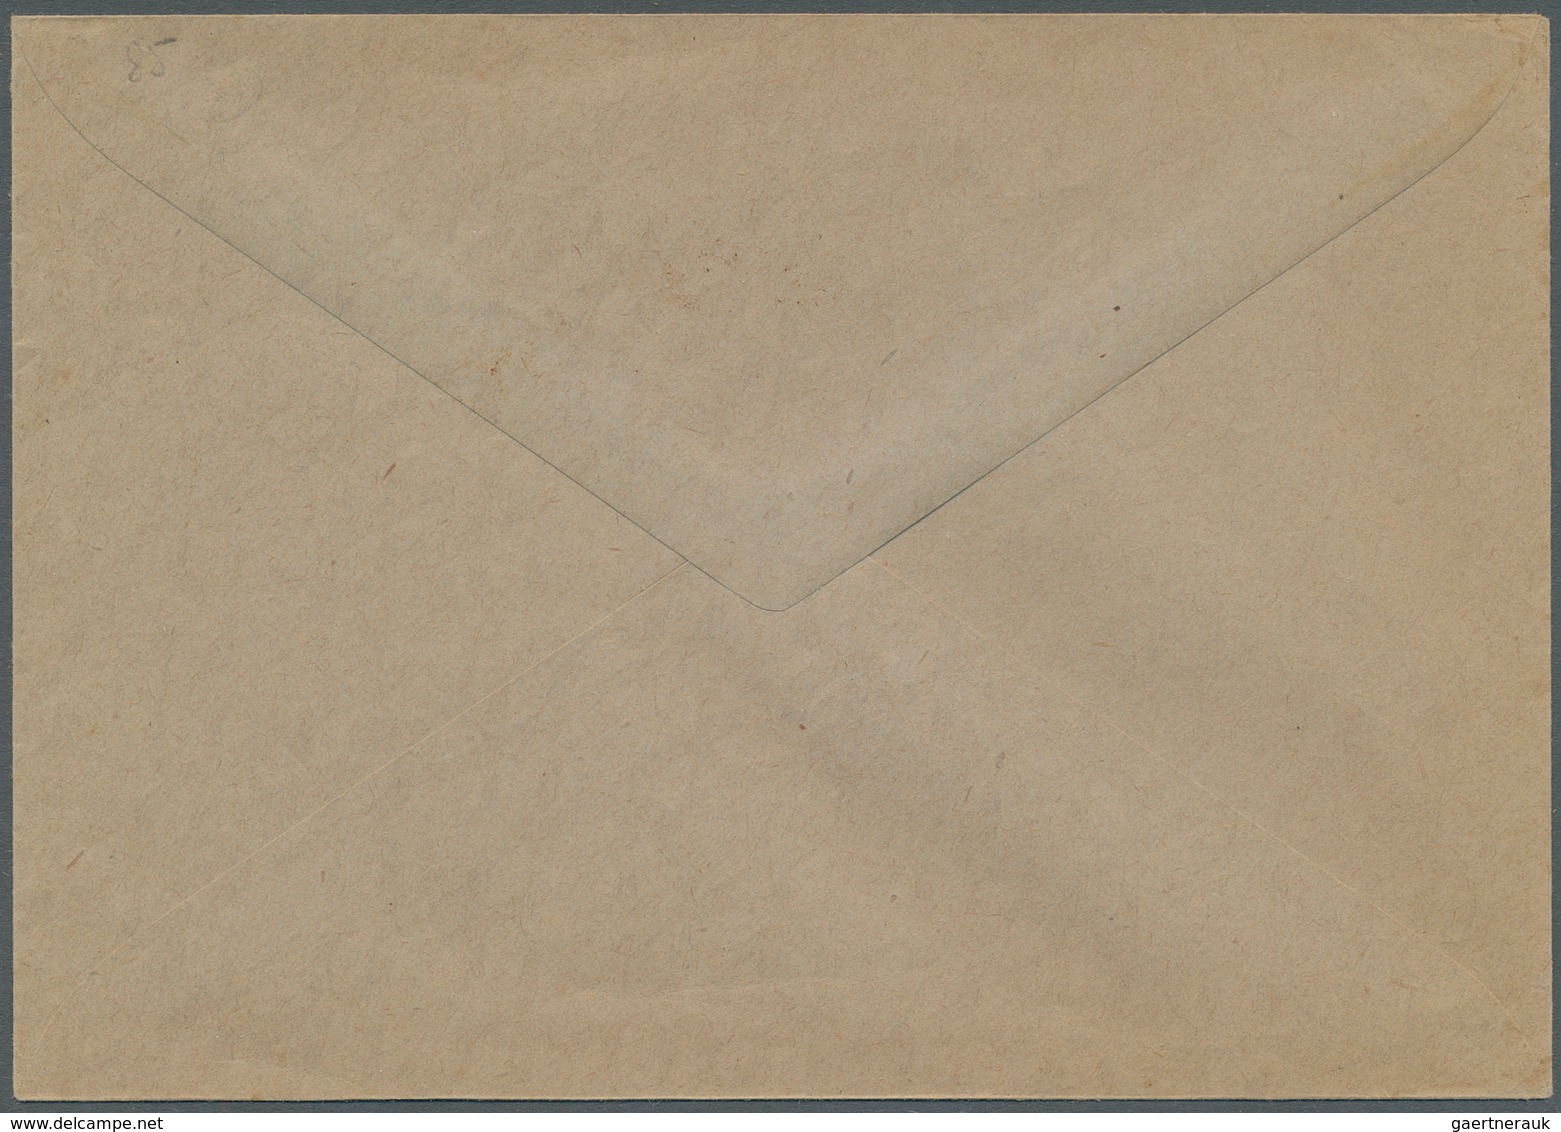 Sowjetunion - Ganzsachen: 1931/35 9 Unused And Used Pictured Postal Stationery Envelopes With Some R - Unclassified